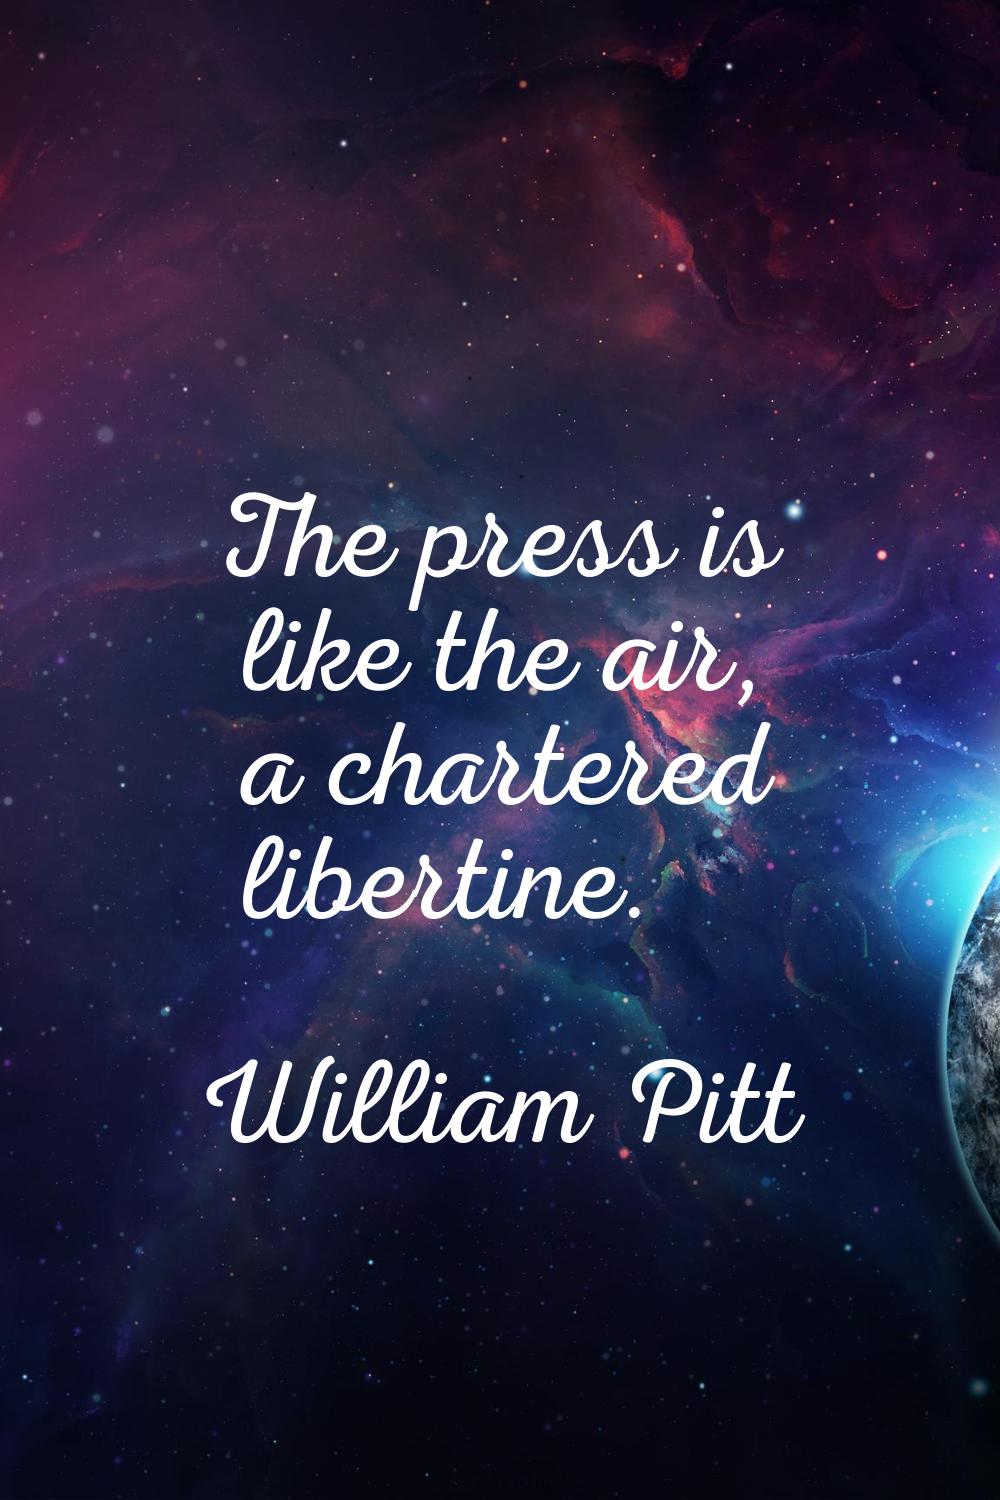 The press is like the air, a chartered libertine.